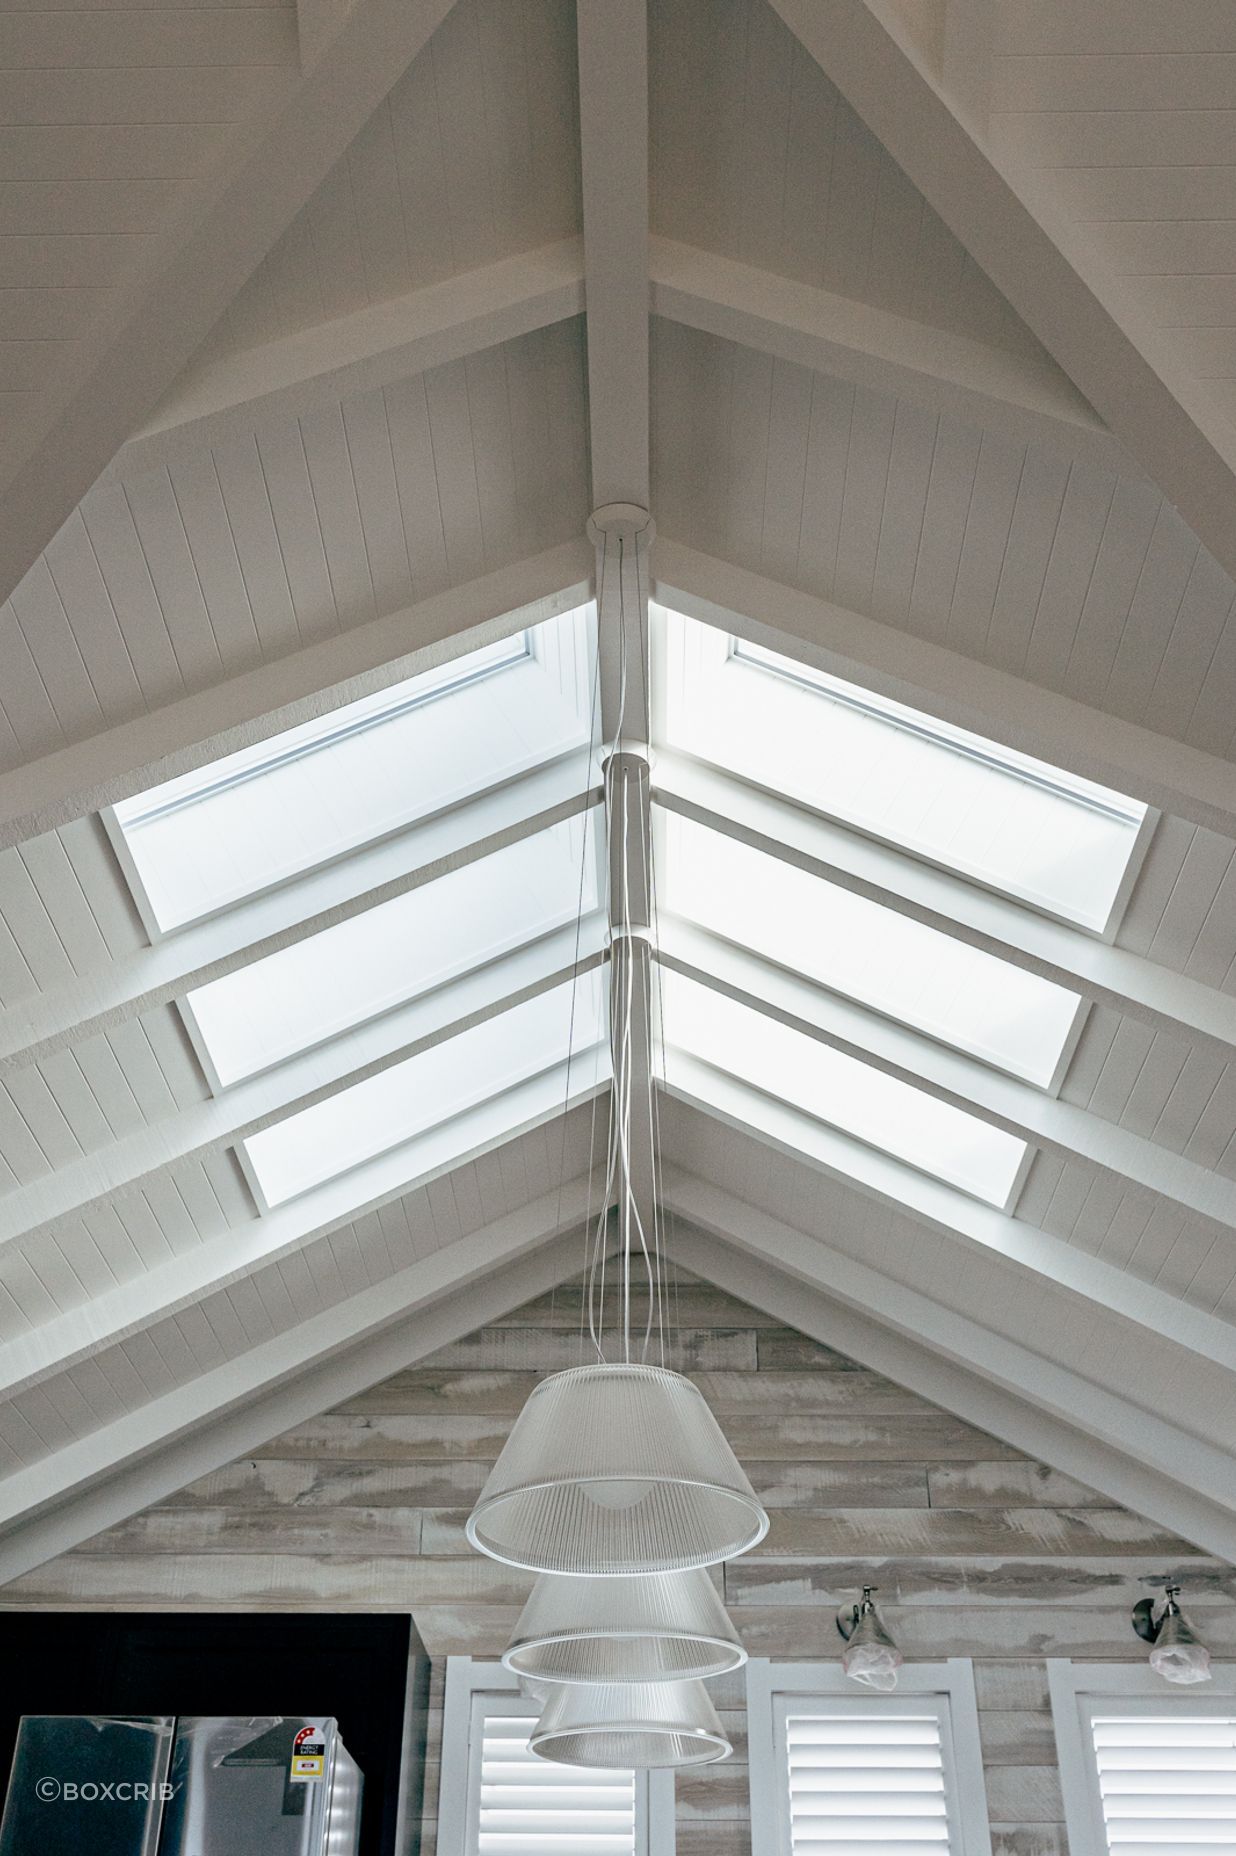 In the interior, the gabled ceilings feature V-groove ply, and sky lights, while the windows feature classic shutters as per the Cape cod style.